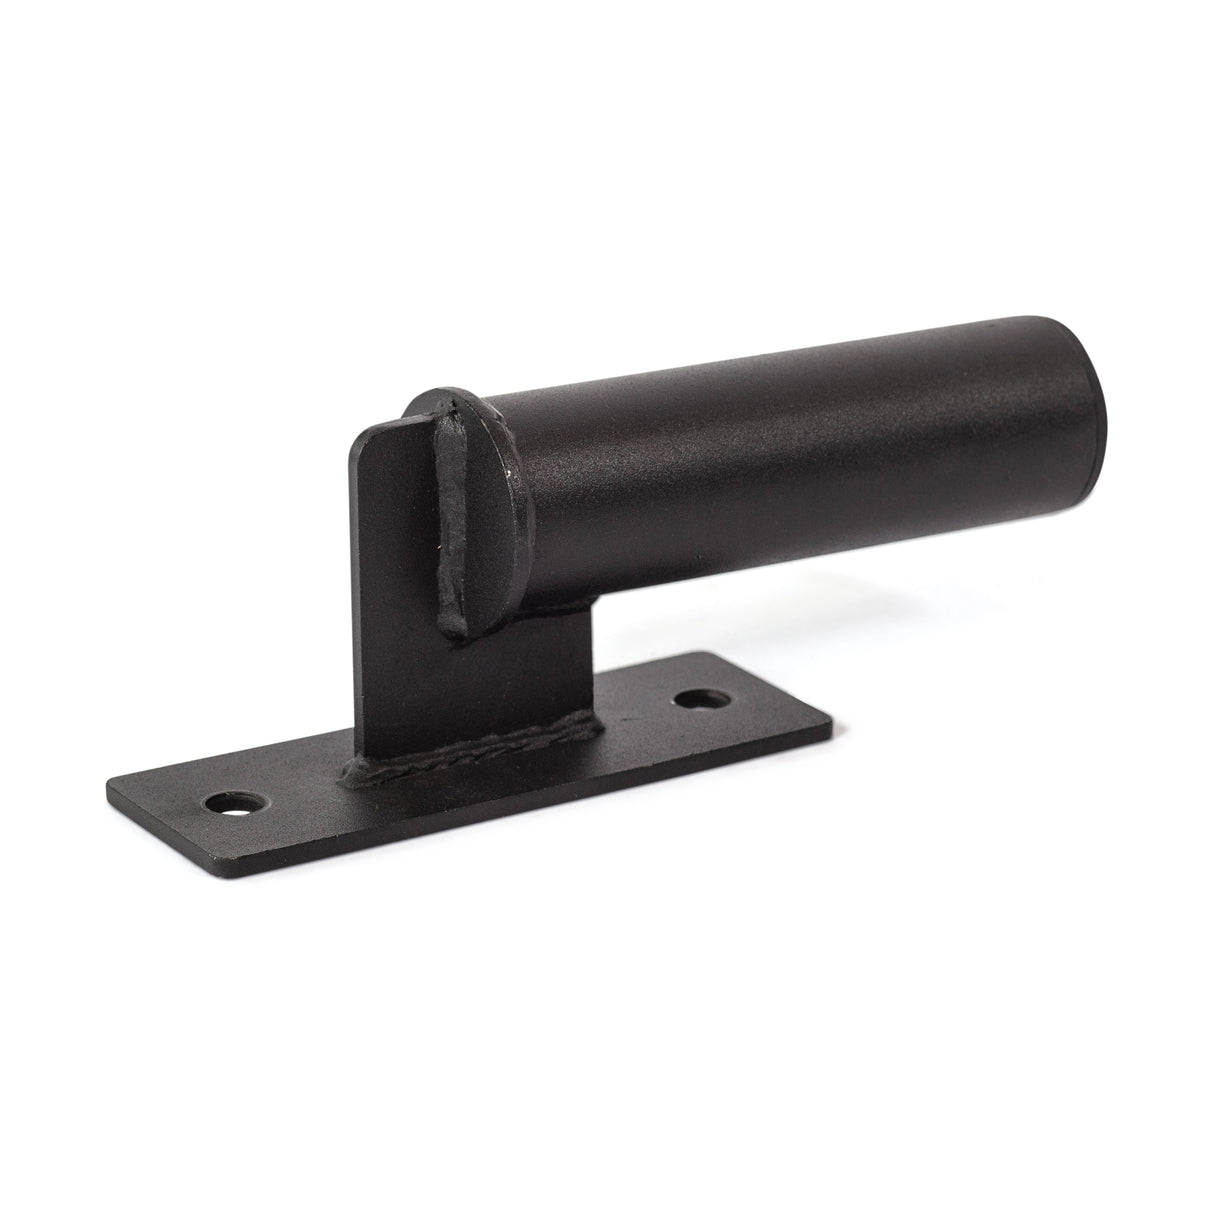 angled view of the Vertical Mount Barbell Holder Rack Attachment